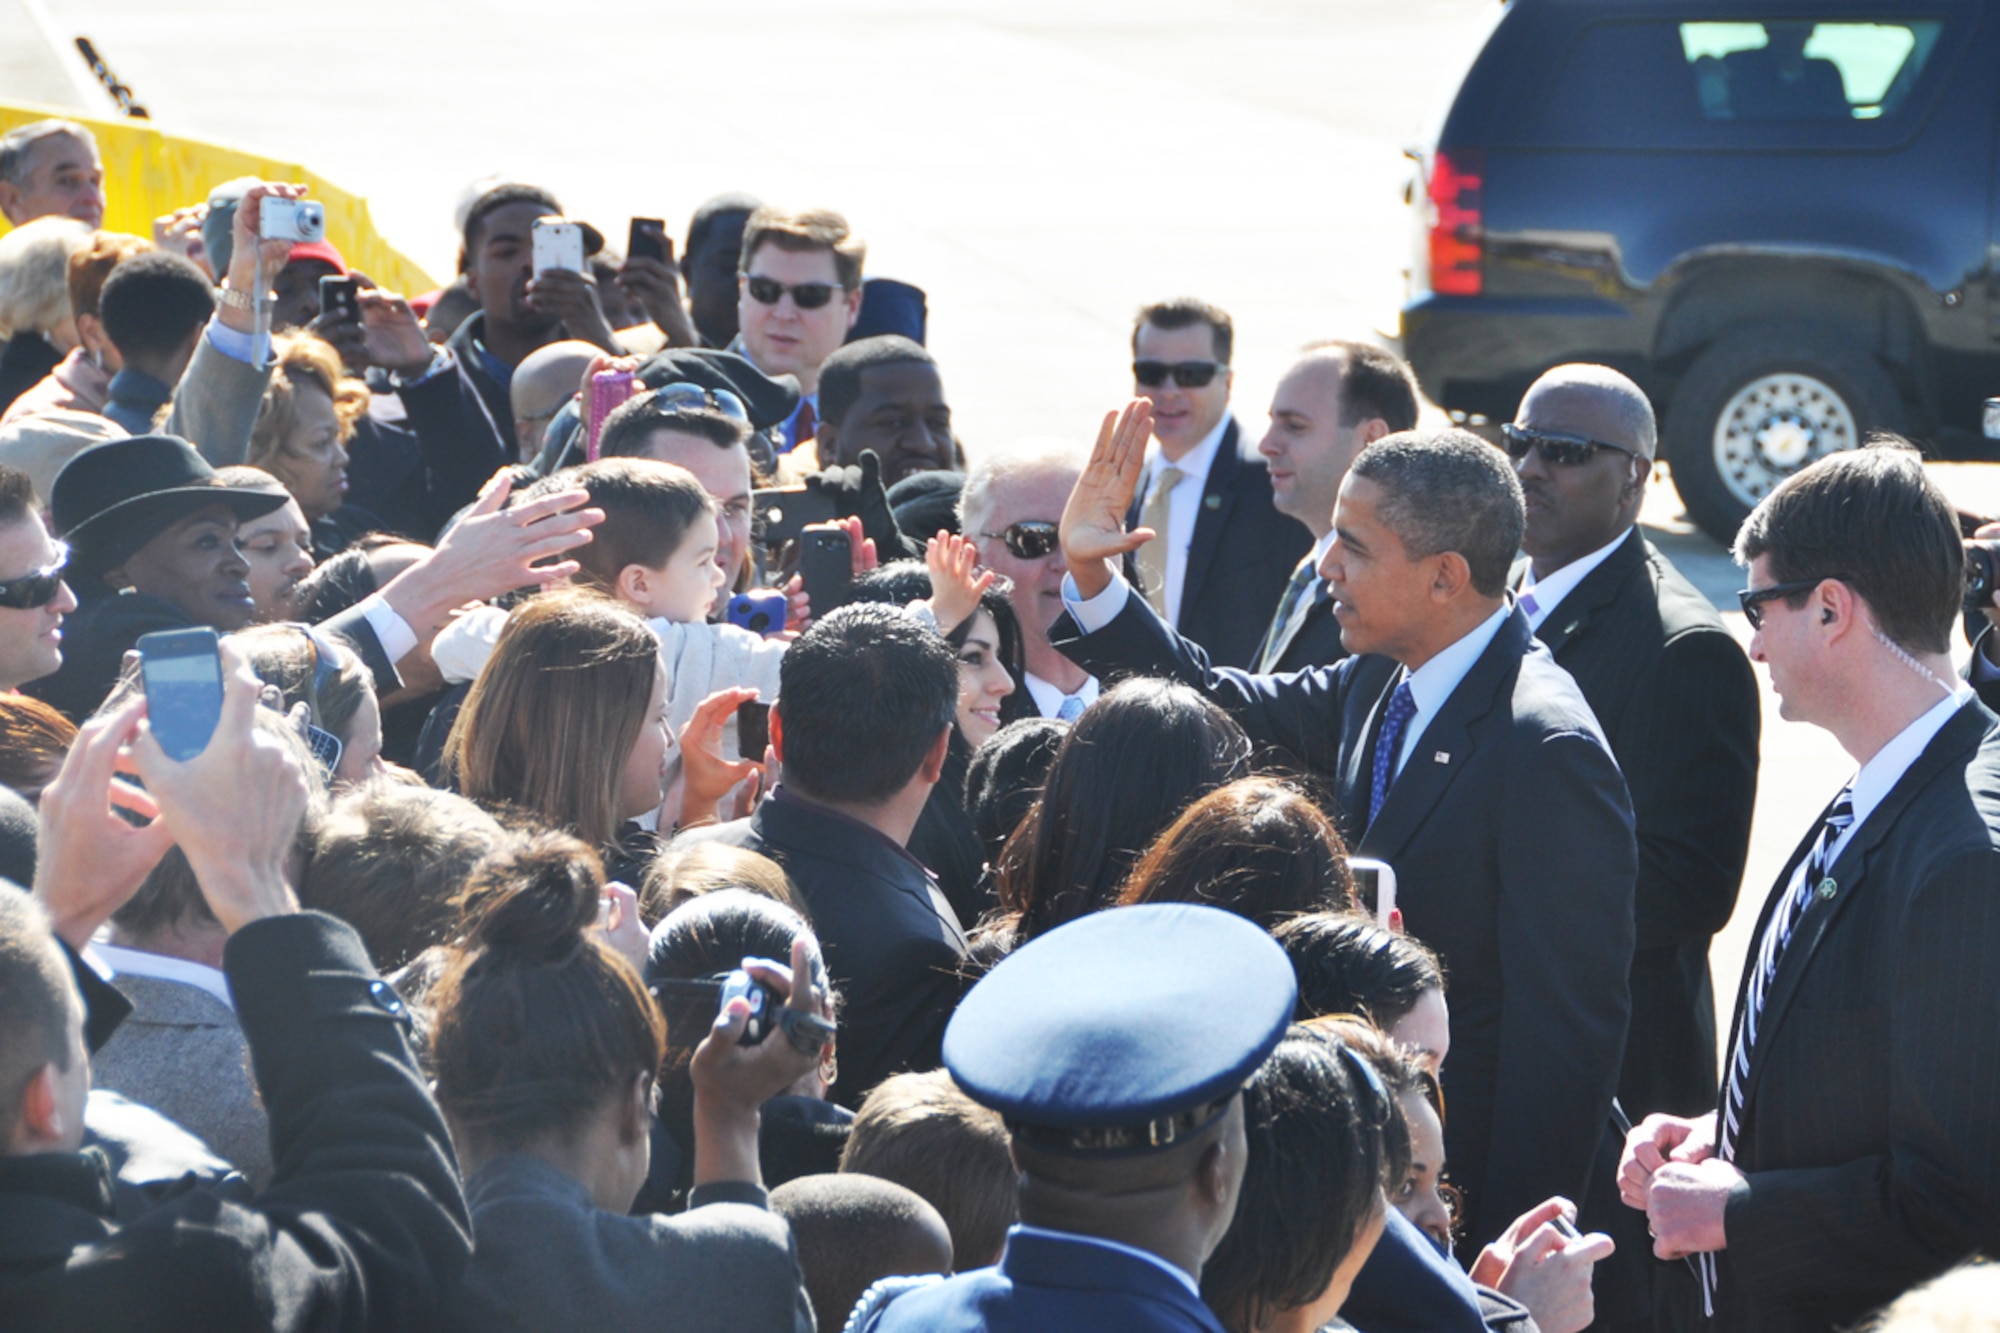 President Barack Obama gives a hi-five during his visit to Dobbins Air Reserve Base, Feb. 14. The president was en-route to the City of Decatur Recreation Center to discuss proposals outlined in his recent state of the union address. (U.S. Air Force photo/James Branch)